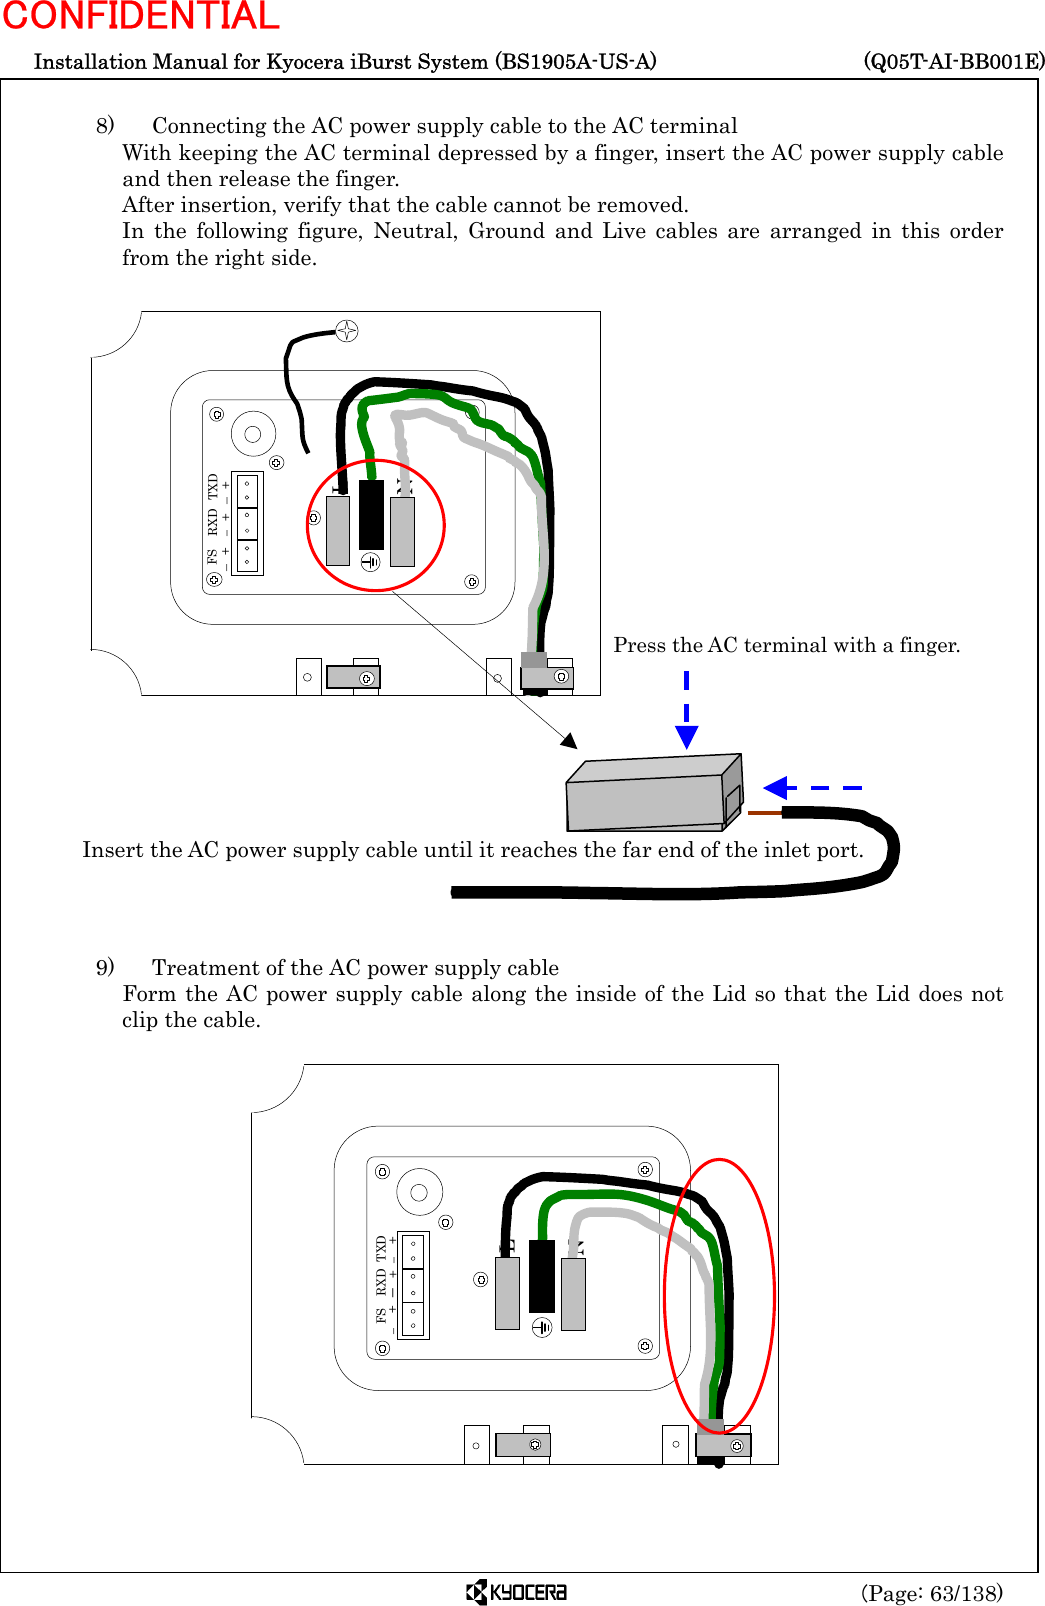  Installation Manual for Kyocera iBurst System (BS1905A-US-A)     (Q05T-AI-BB001E) (Page: 63/138) CONFIDENTIAL  8)    Connecting the AC power supply cable to the AC terminal With keeping the AC terminal depressed by a finger, insert the AC power supply cable and then release the finger. After insertion, verify that the cable cannot be removed. In the following figure, Neutral, Ground and Live cables are arranged in this order from the right side.                           9)    Treatment of the AC power supply cable Form the AC power supply cable along the inside of the Lid so that the Lid does not clip the cable.                     L Press the AC terminal with a finger. Insert the AC power supply cable until it reaches the far end of the inlet port.N   FS – + RXD – +  TXD – + N L   FS –  + RXD －  +  TXD –  + 